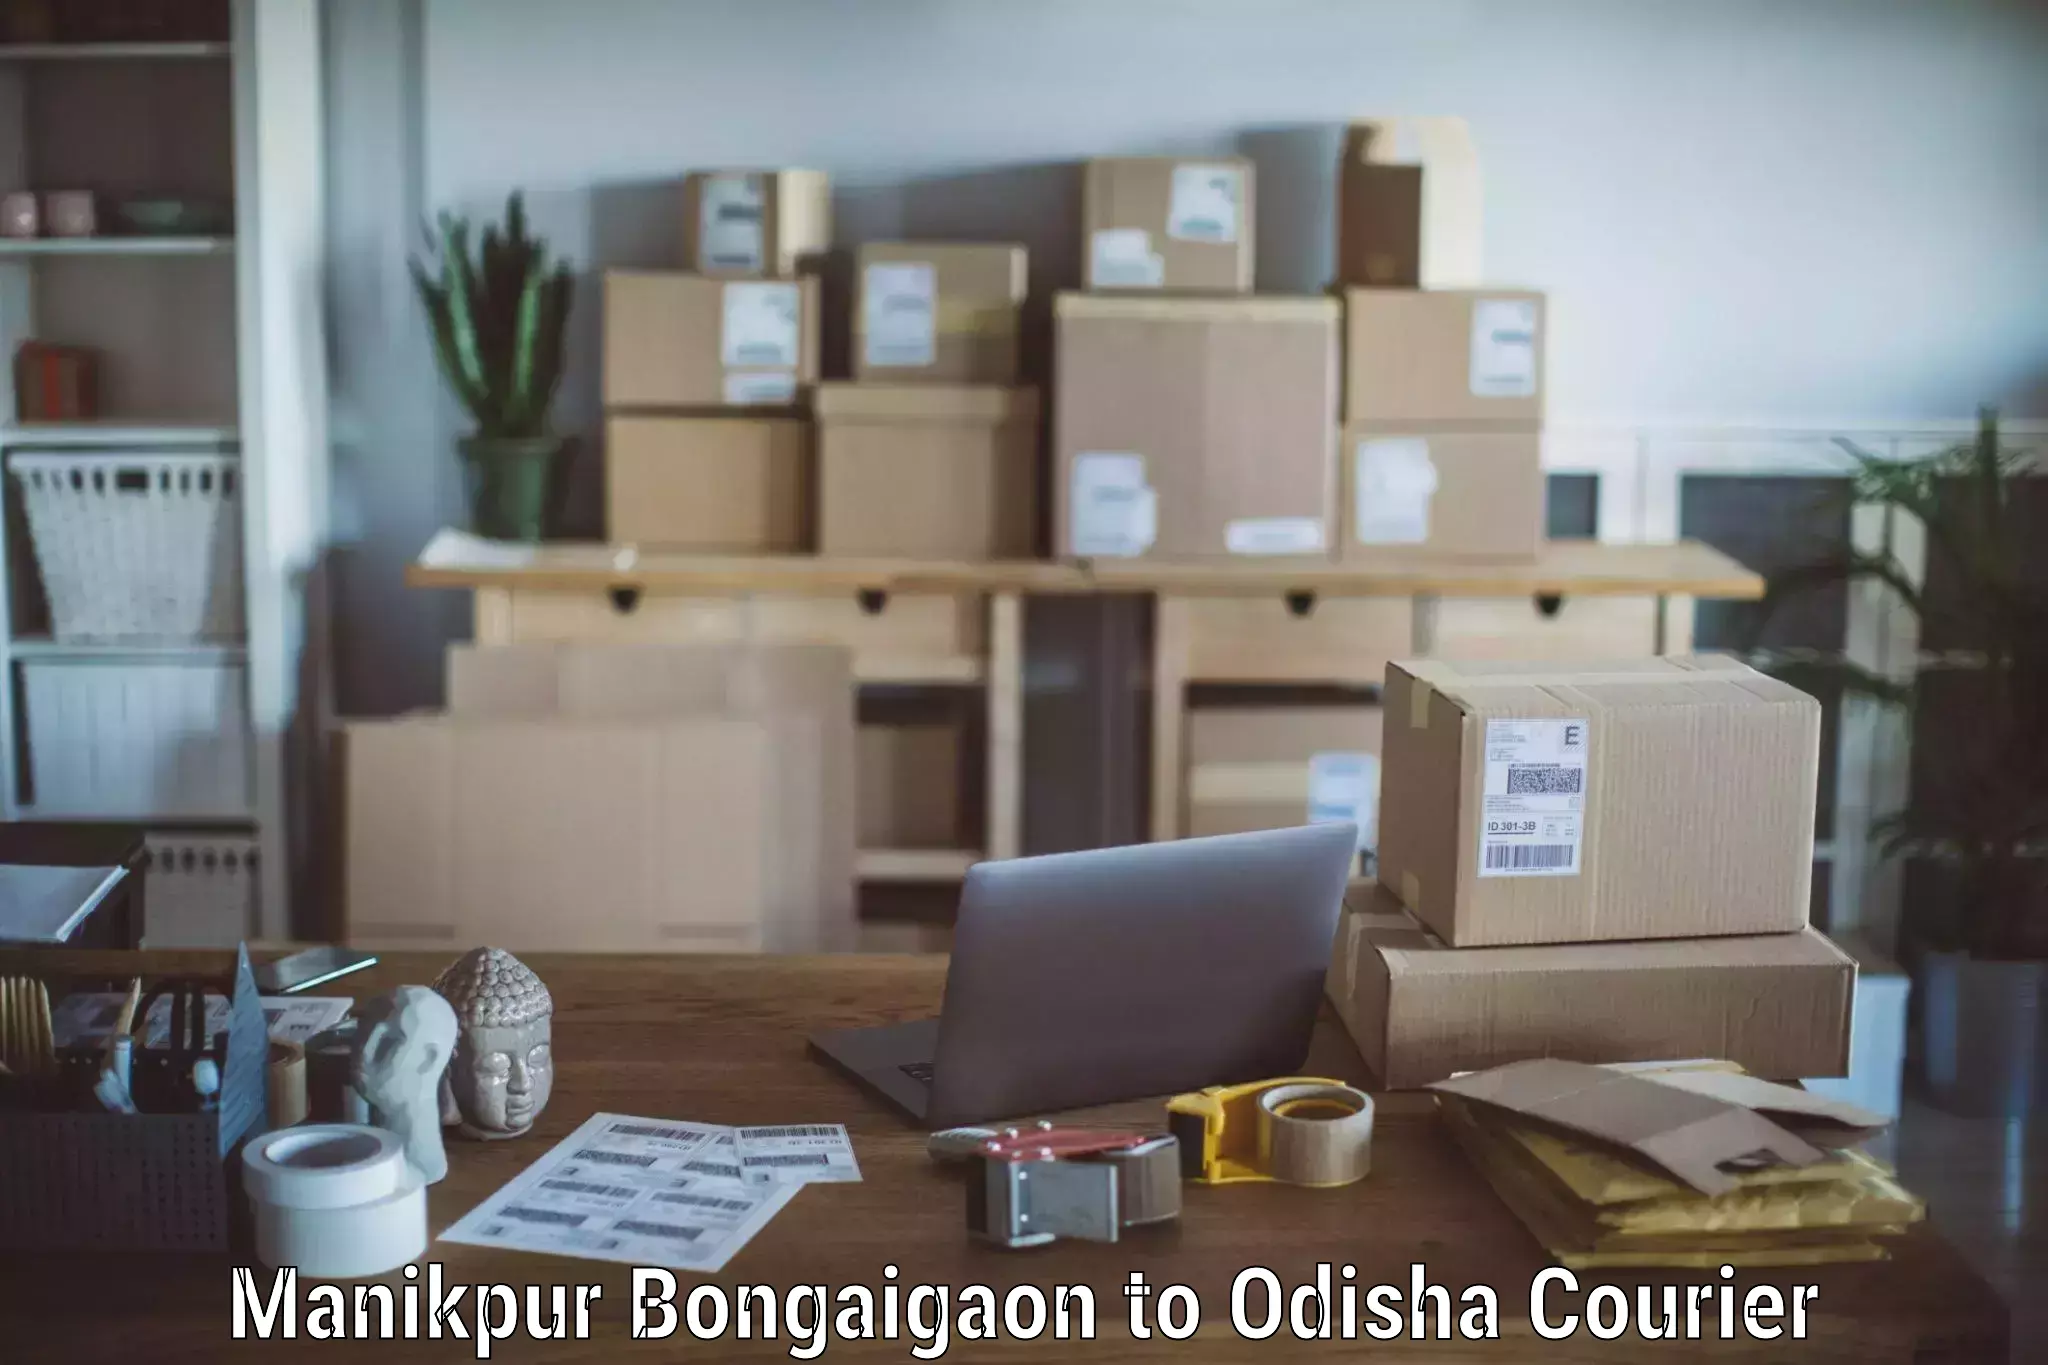 Quality relocation assistance Manikpur Bongaigaon to Mohana